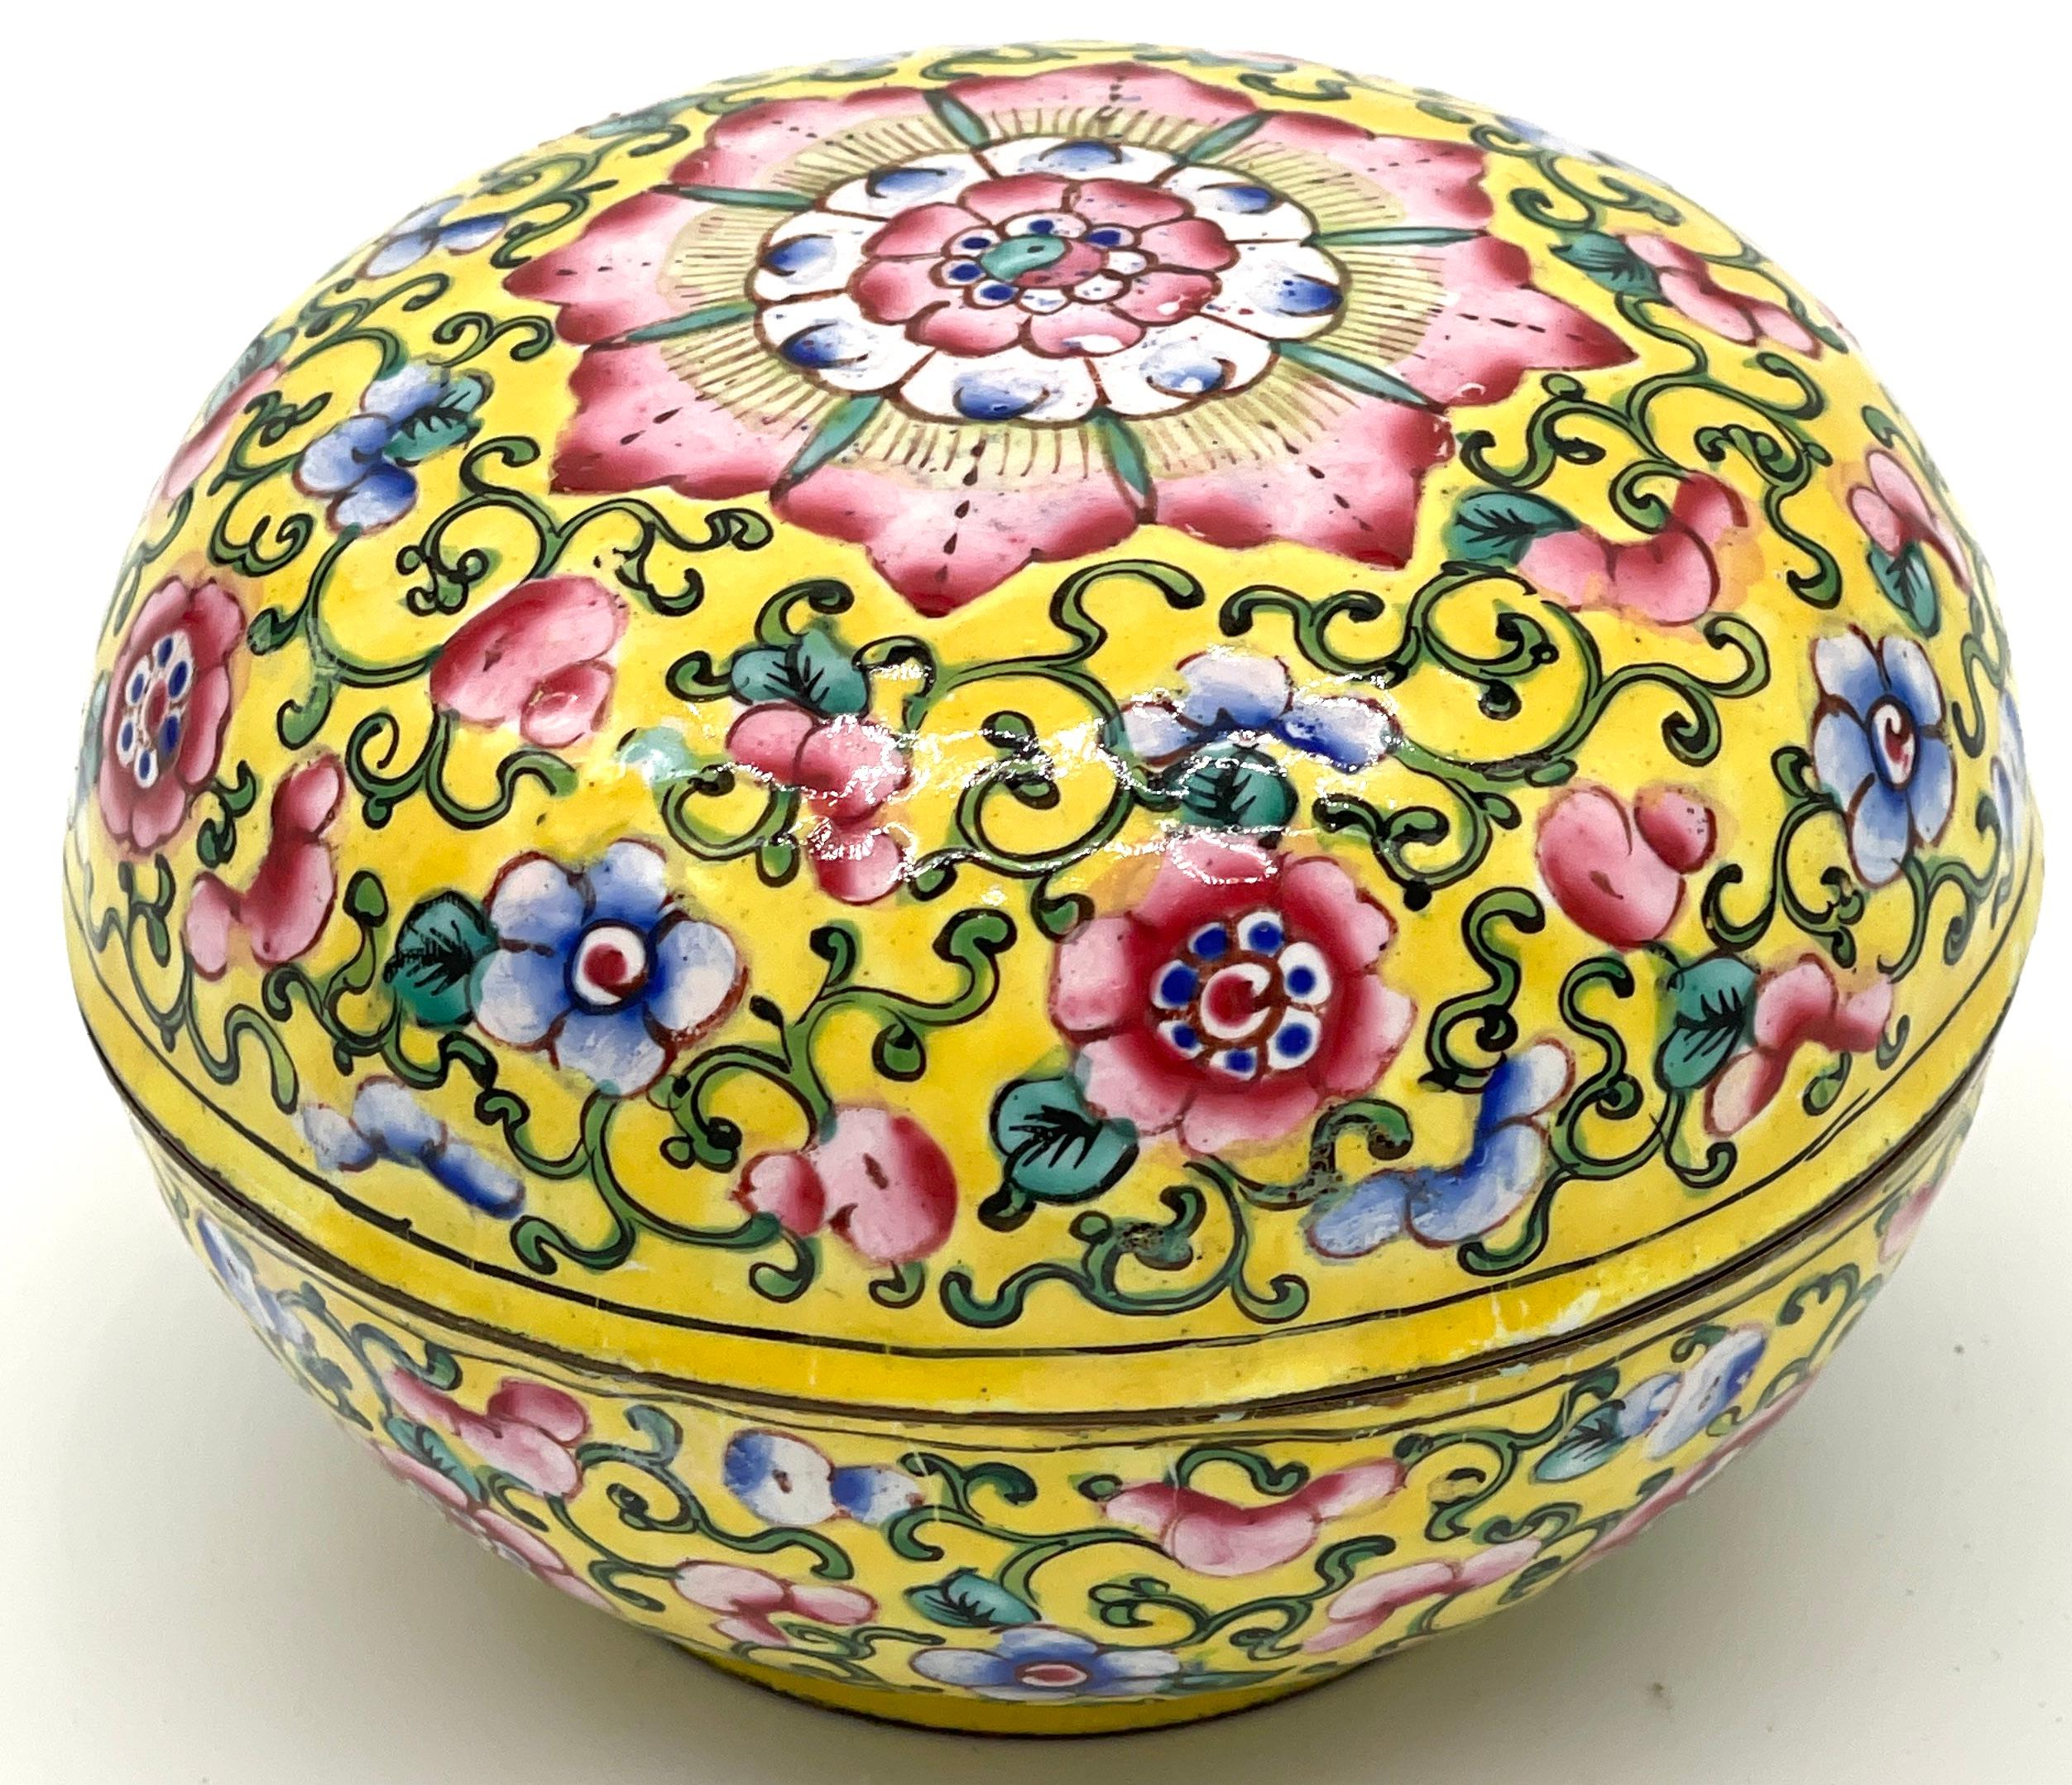 Chinese Export Yellow Floral Beijing Enamel Round Box 
China, 20th Century 

A stunning example of 20th-century Beijing Enamel, this domed circular box showcases the exquisite artistry and craftsmanship of Chinese enamel work. Originating from